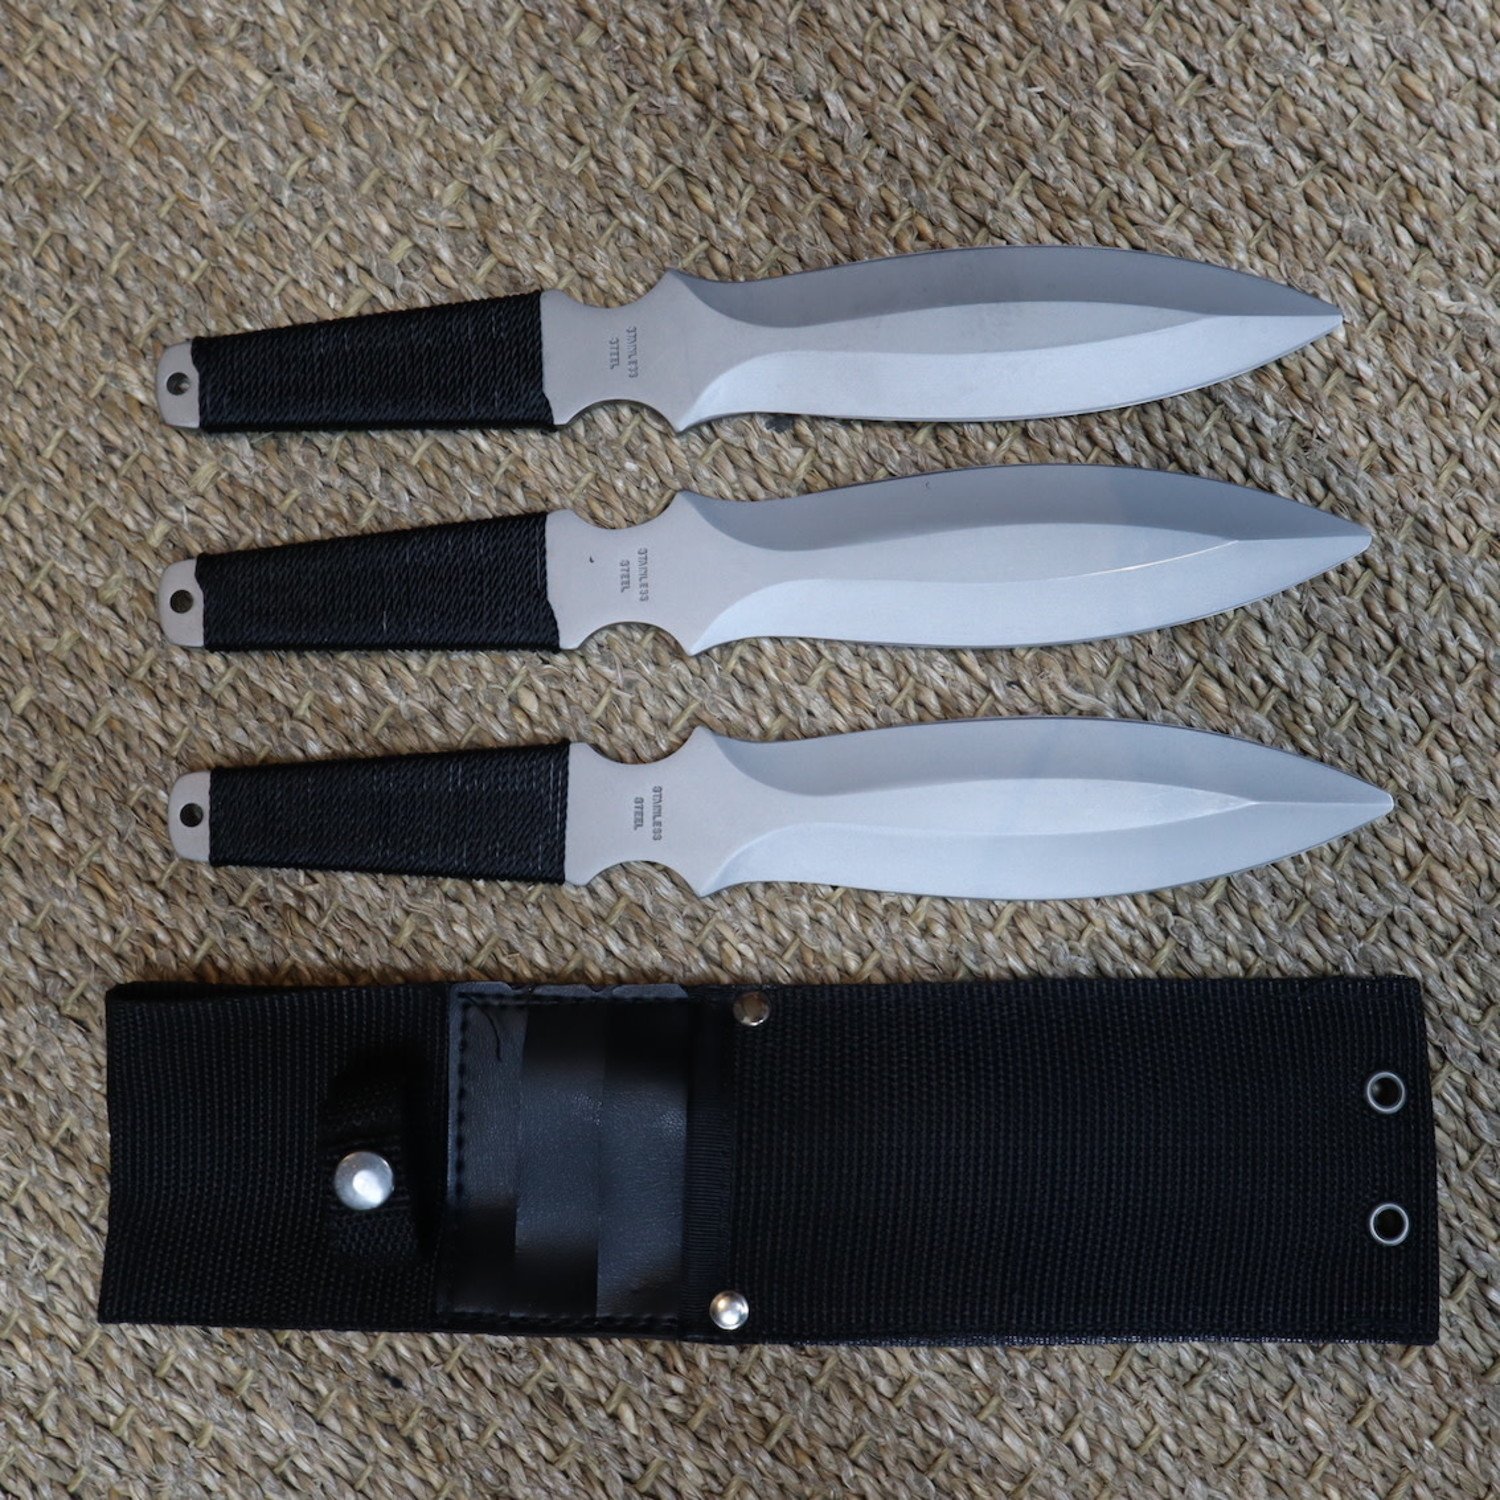 Practice Throwing Knives for Martial Arts, made from Stainless